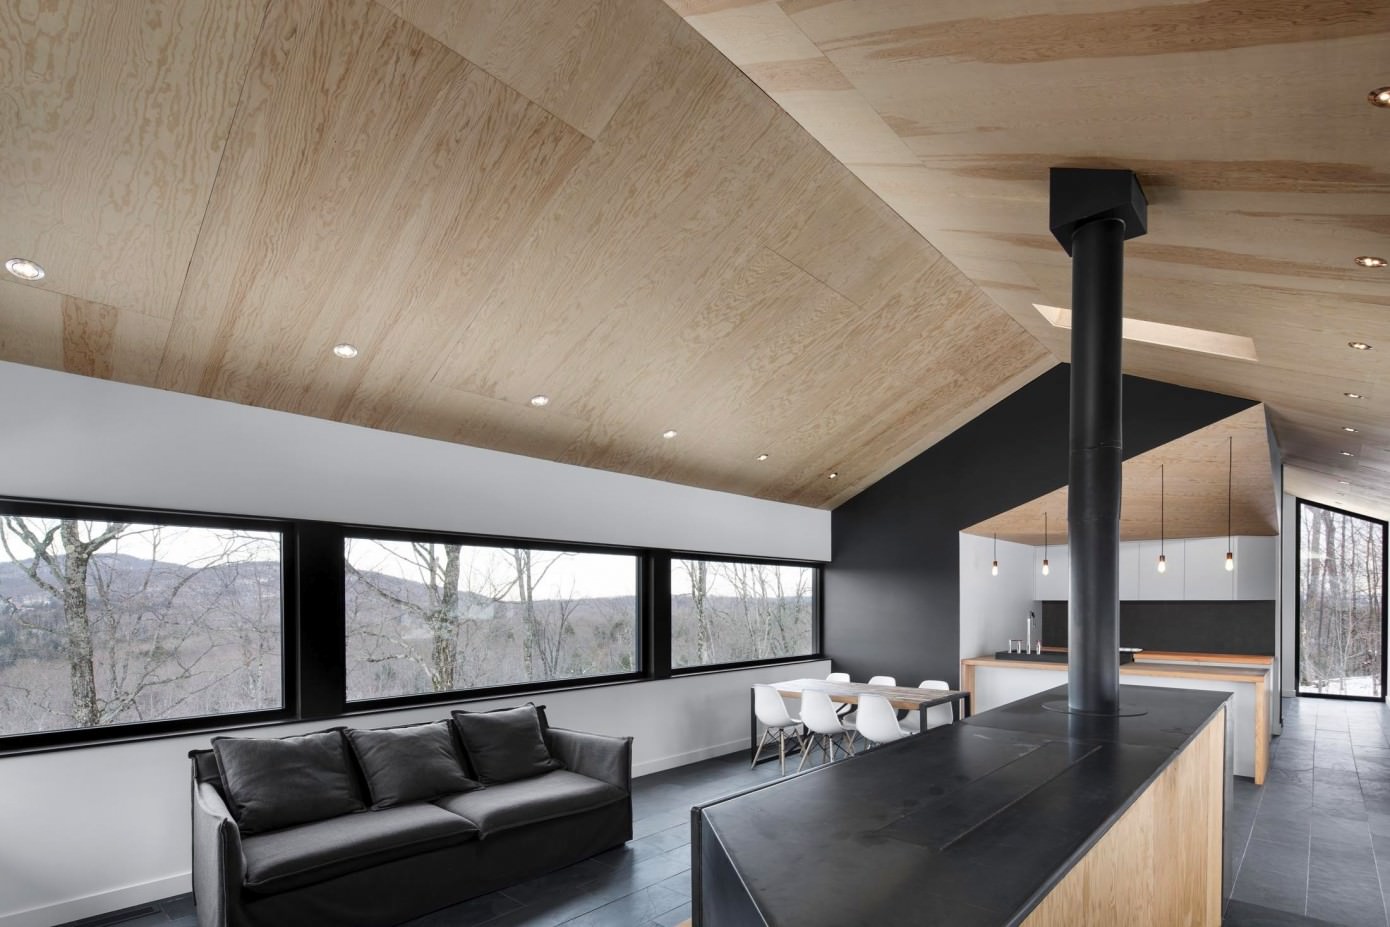 Bolton Residence by _naturehumaine